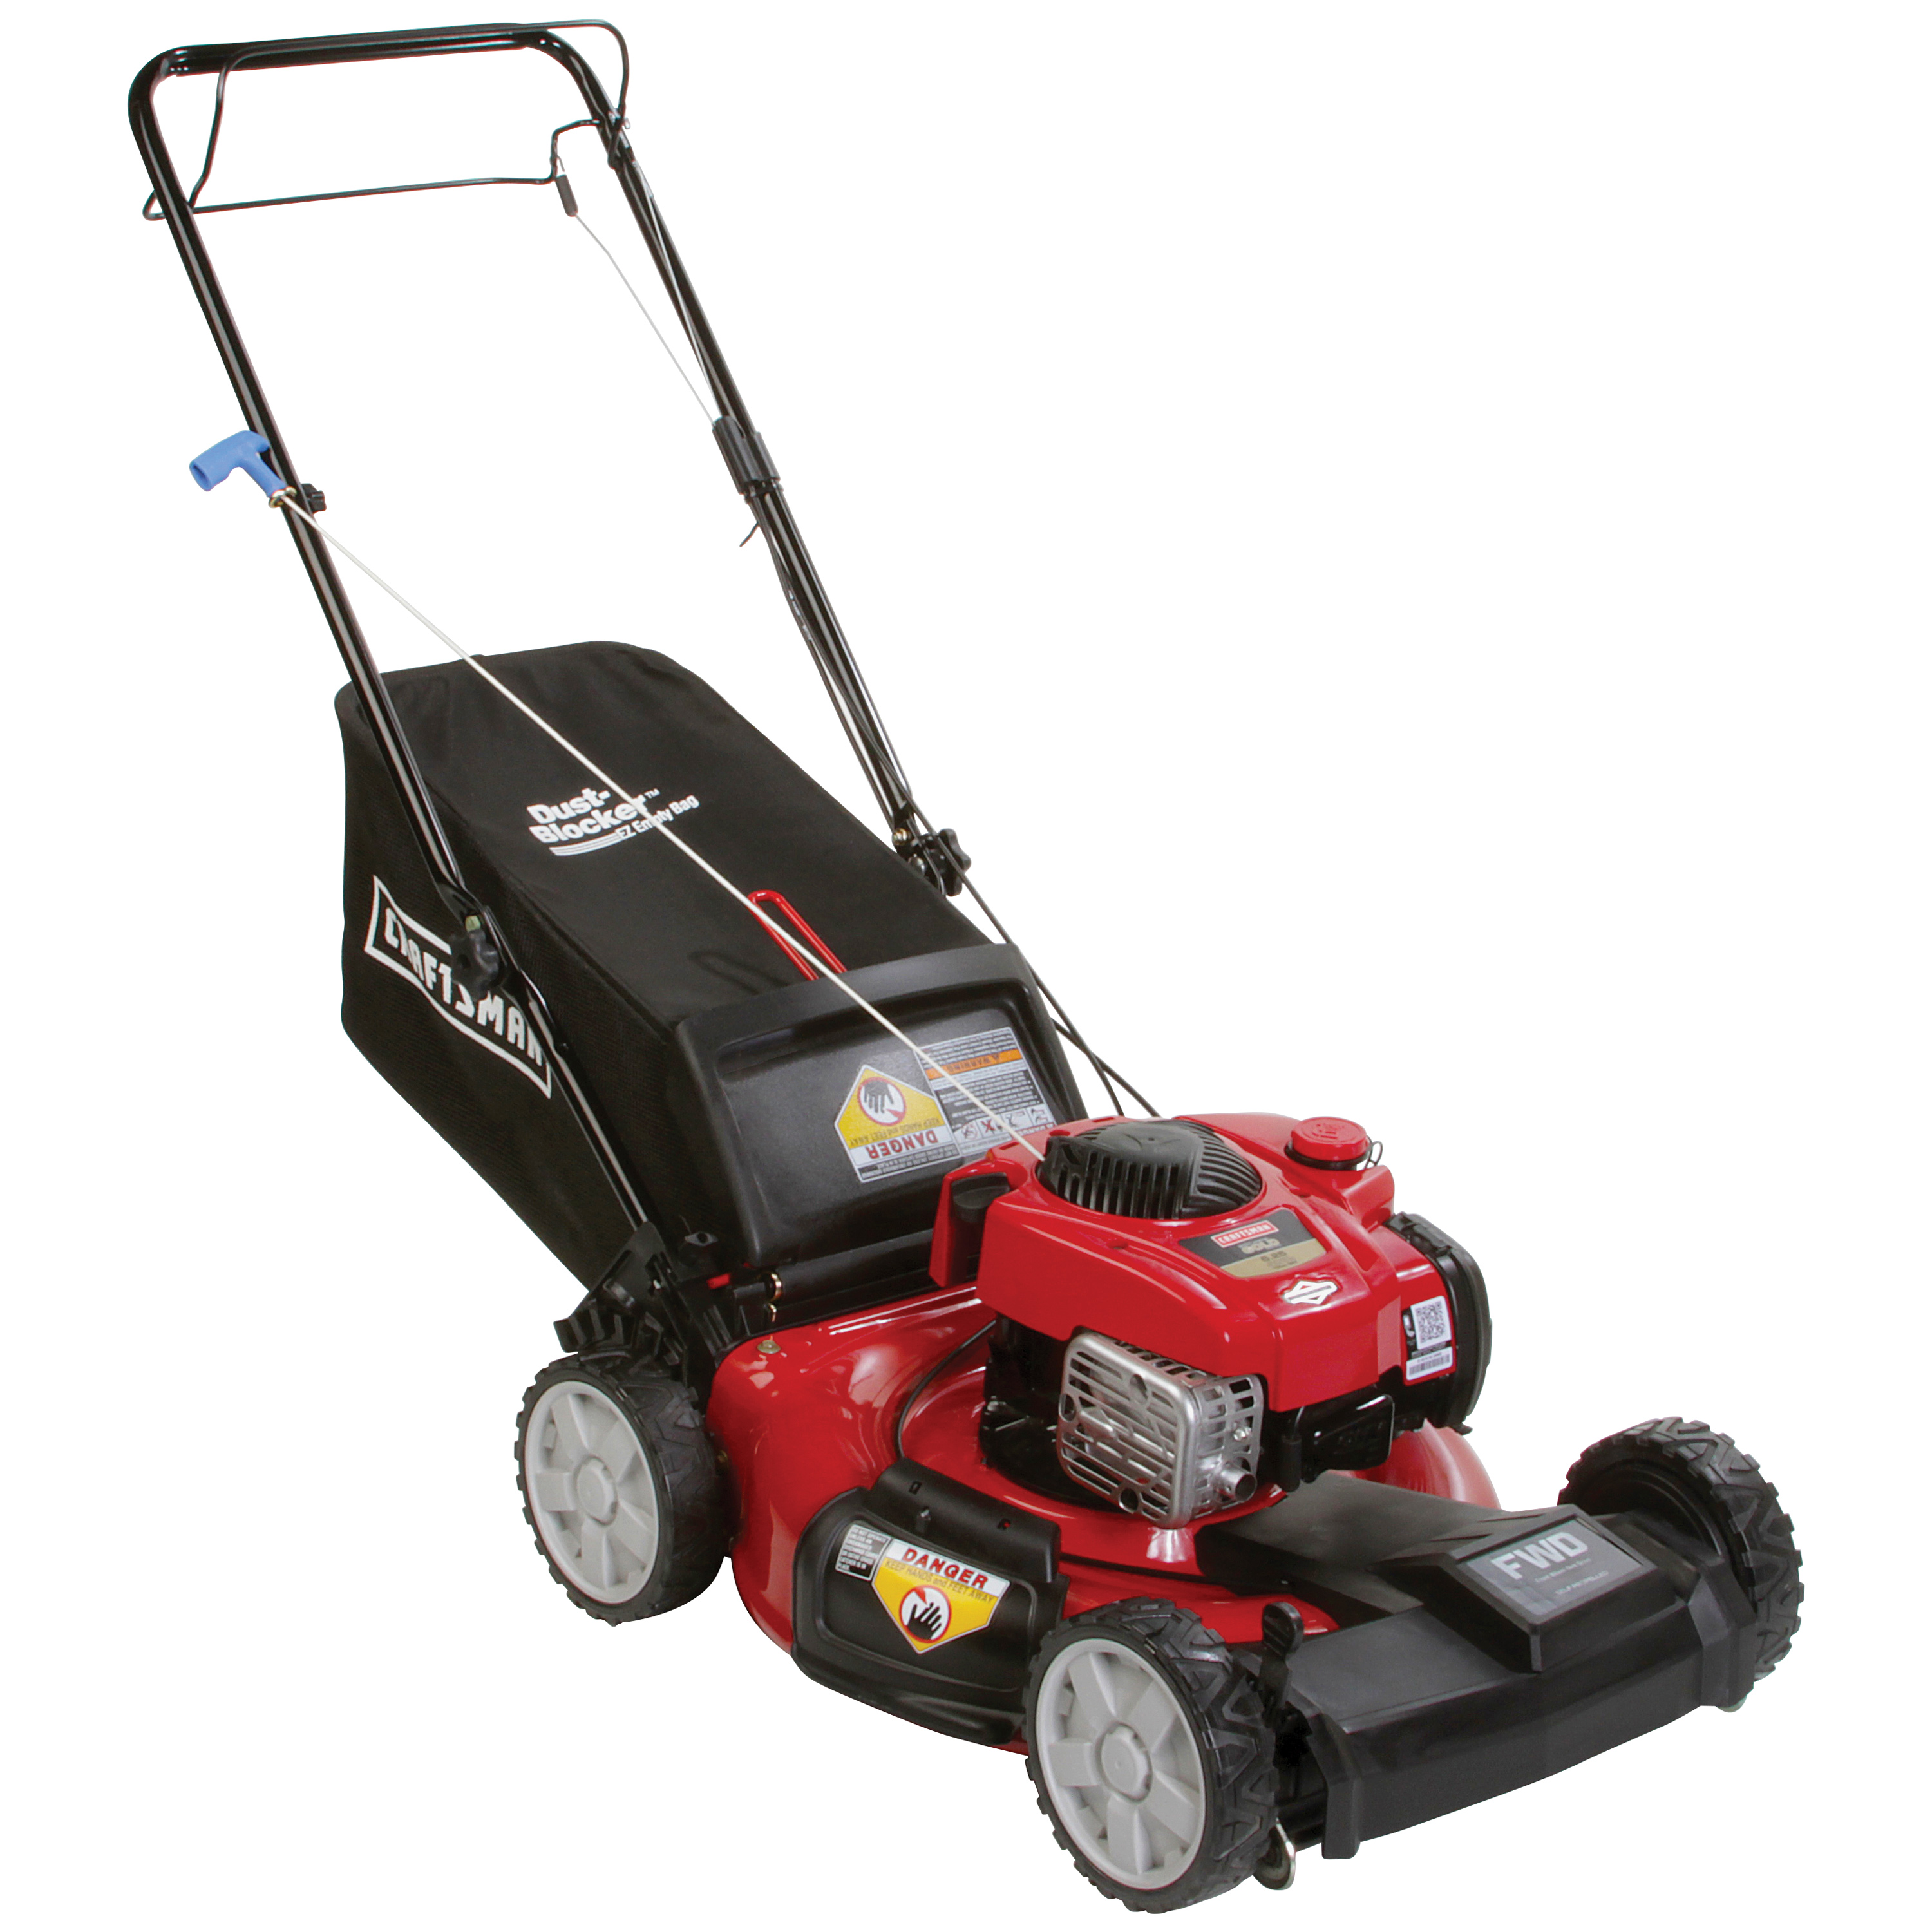 Craftsman 37700 150cc 21" Just Check & Add Front Wheel Drive Lawn Mower